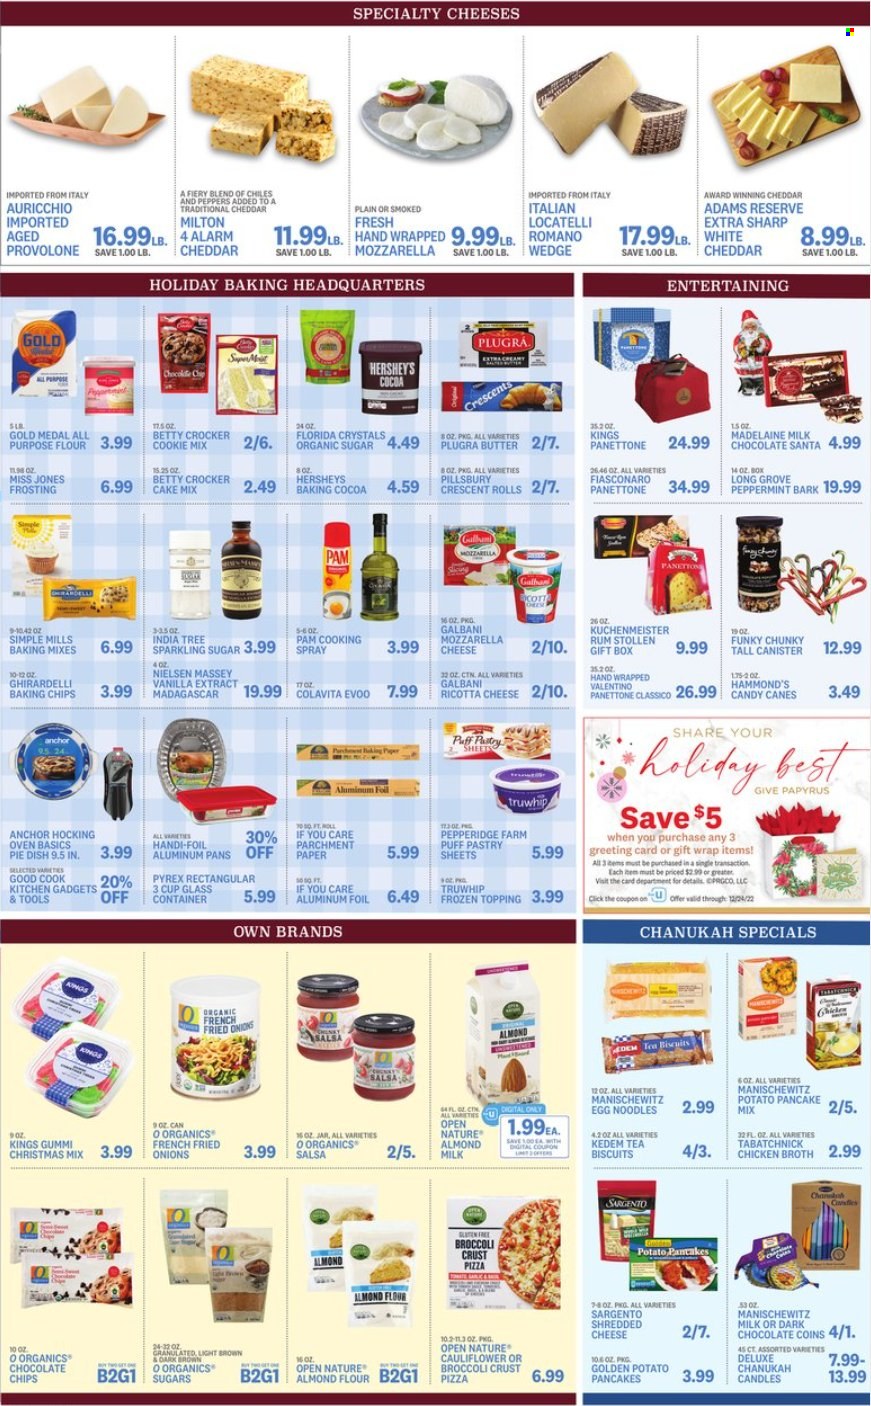 thumbnail - Kings Food Markets Flyer - 12/02/2022 - 12/08/2022 - Sales products - crescent rolls, stollen, panettone, cake mix, broccoli, pizza, pancakes, Pillsbury, noodles, potato pancakes, ricotta, shredded cheese, Galbani, Provolone, Sargento, almond milk, butter, Anchor, puff pastry, Hershey's, milk chocolate, biscuit, Santa, Ghirardelli, all purpose flour, cocoa, flour, frosting, sugar, chicken broth, topping, broth, vanilla extract, almond flour, baking chips, baking mix, egg noodles, salsa, Classico, cooking spray, Kedem, rum. Page 3.